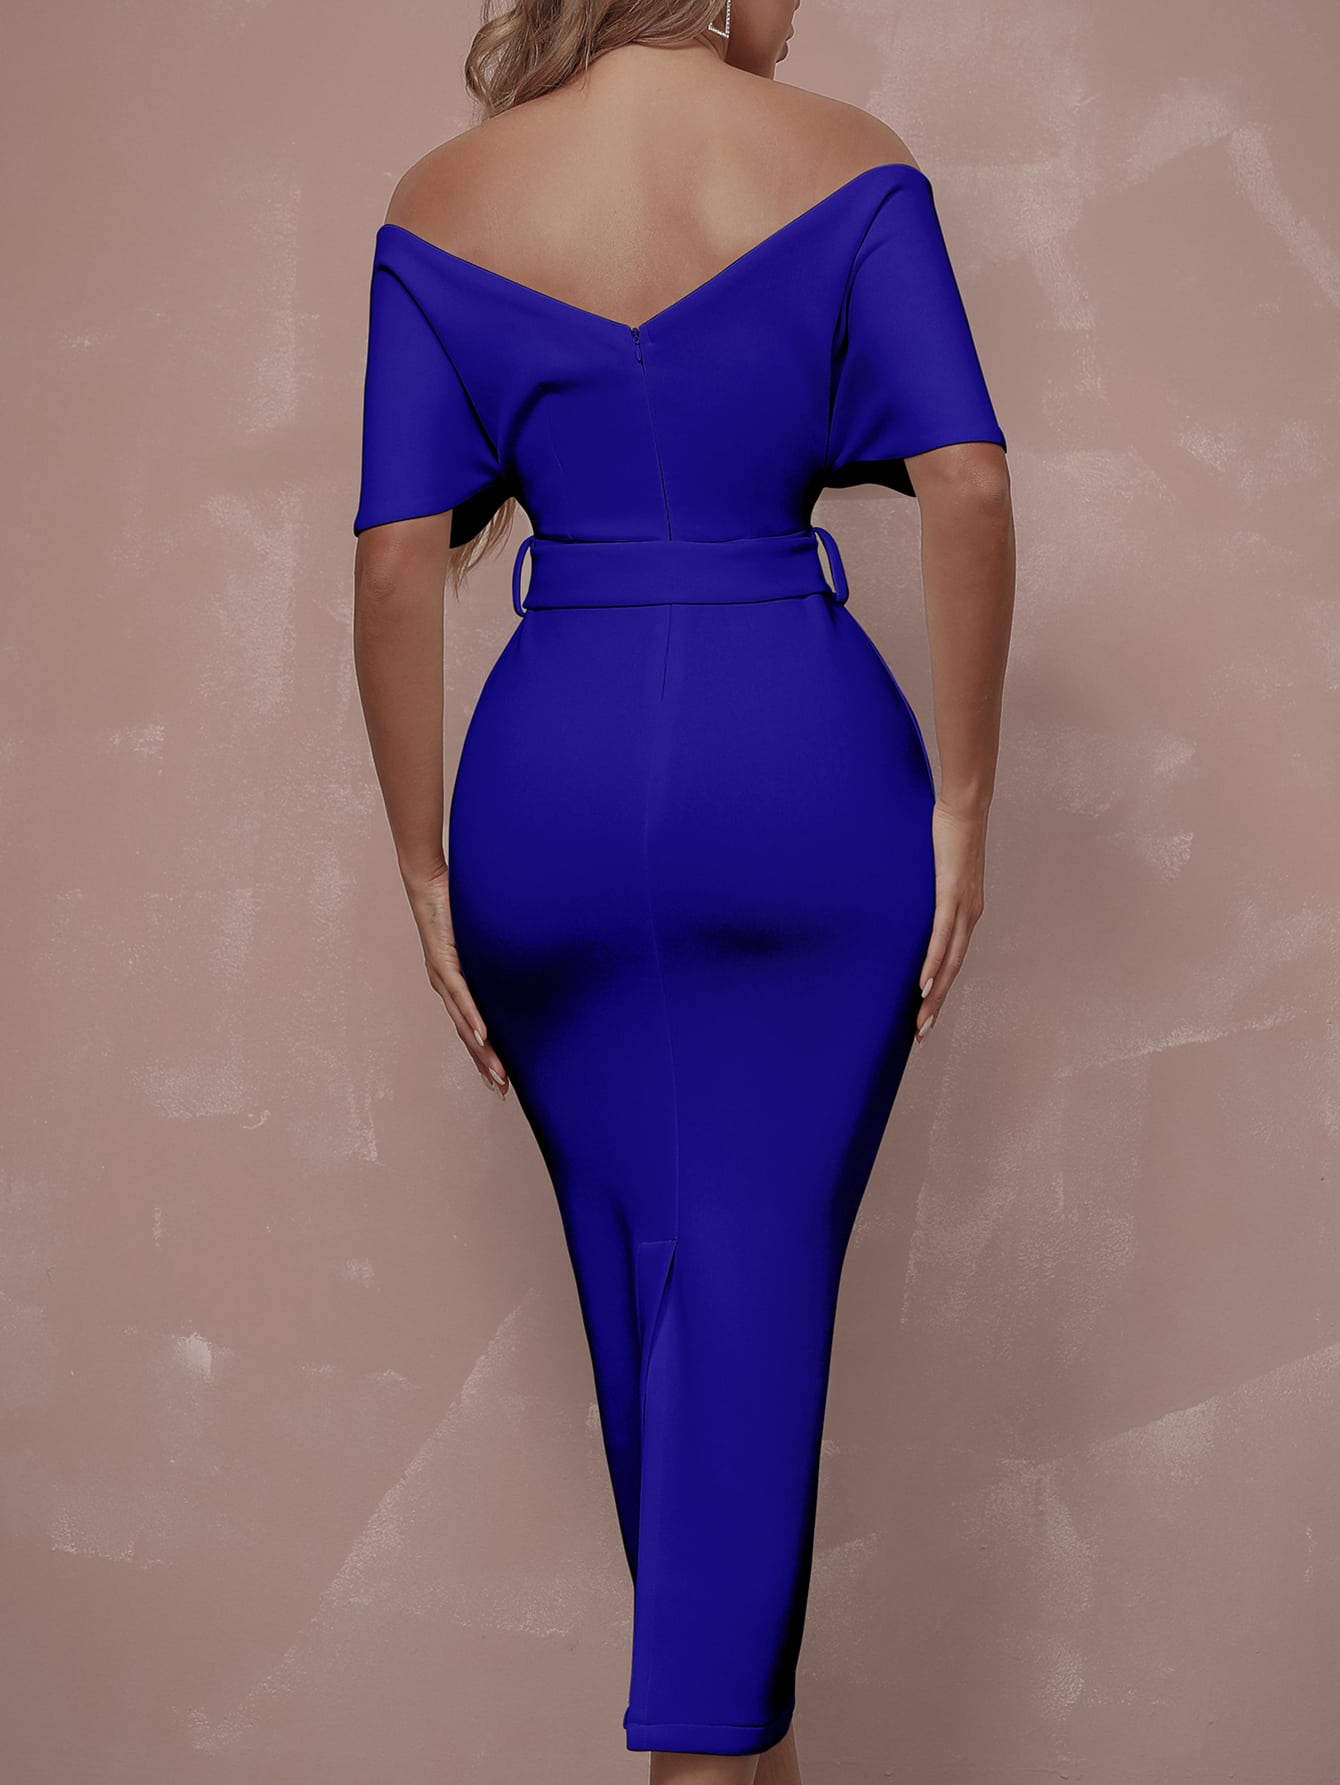 LLstyle Neck Off-Shoulder Backless Front Buckle Belted Cocktail Party Dress